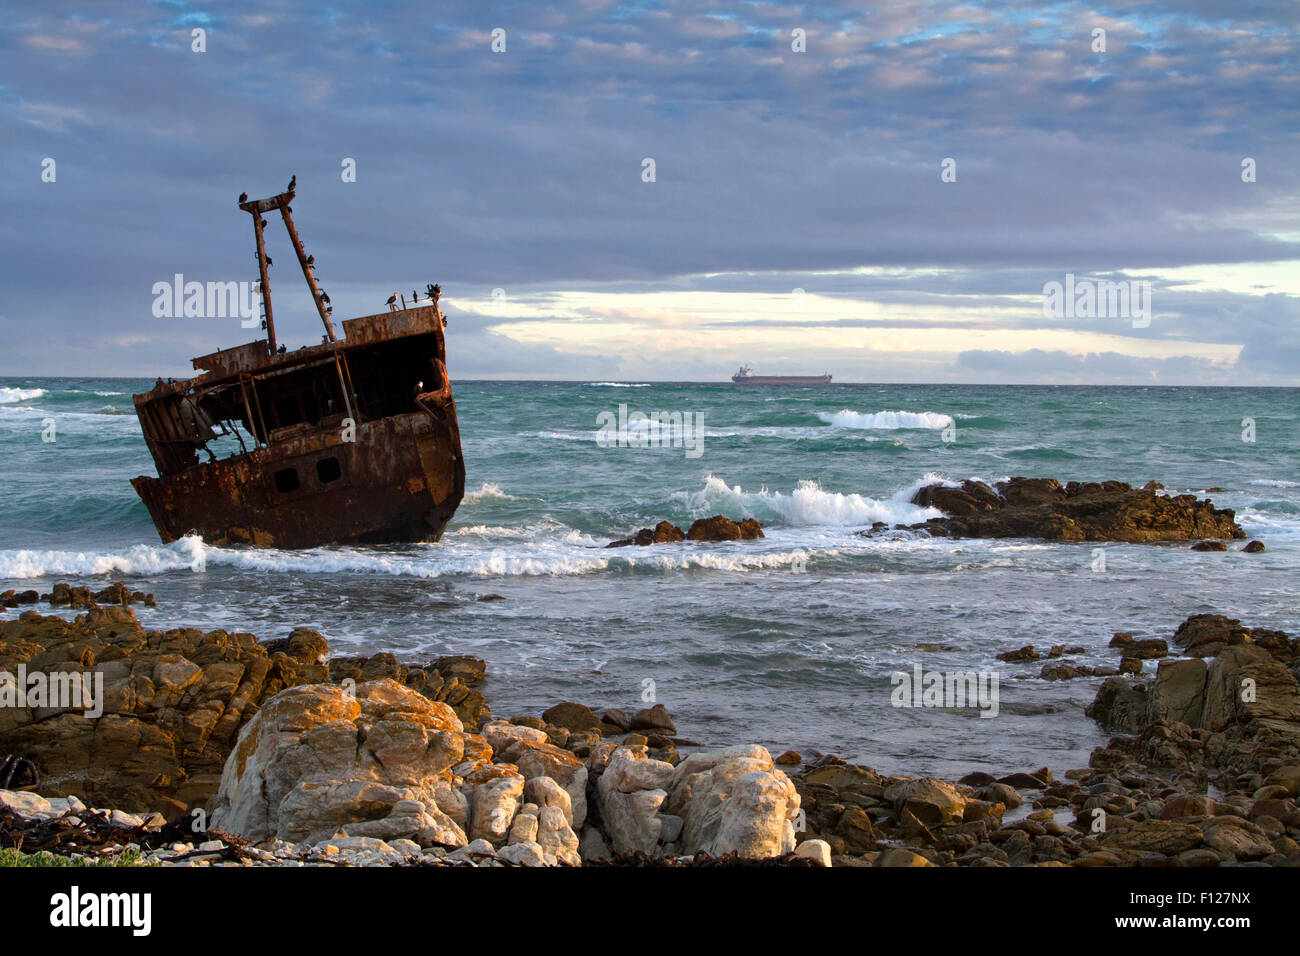 The Meisho Maru No 38 shipwreck at Cape Agulhus, Western Cape, South Africa Stock Photo